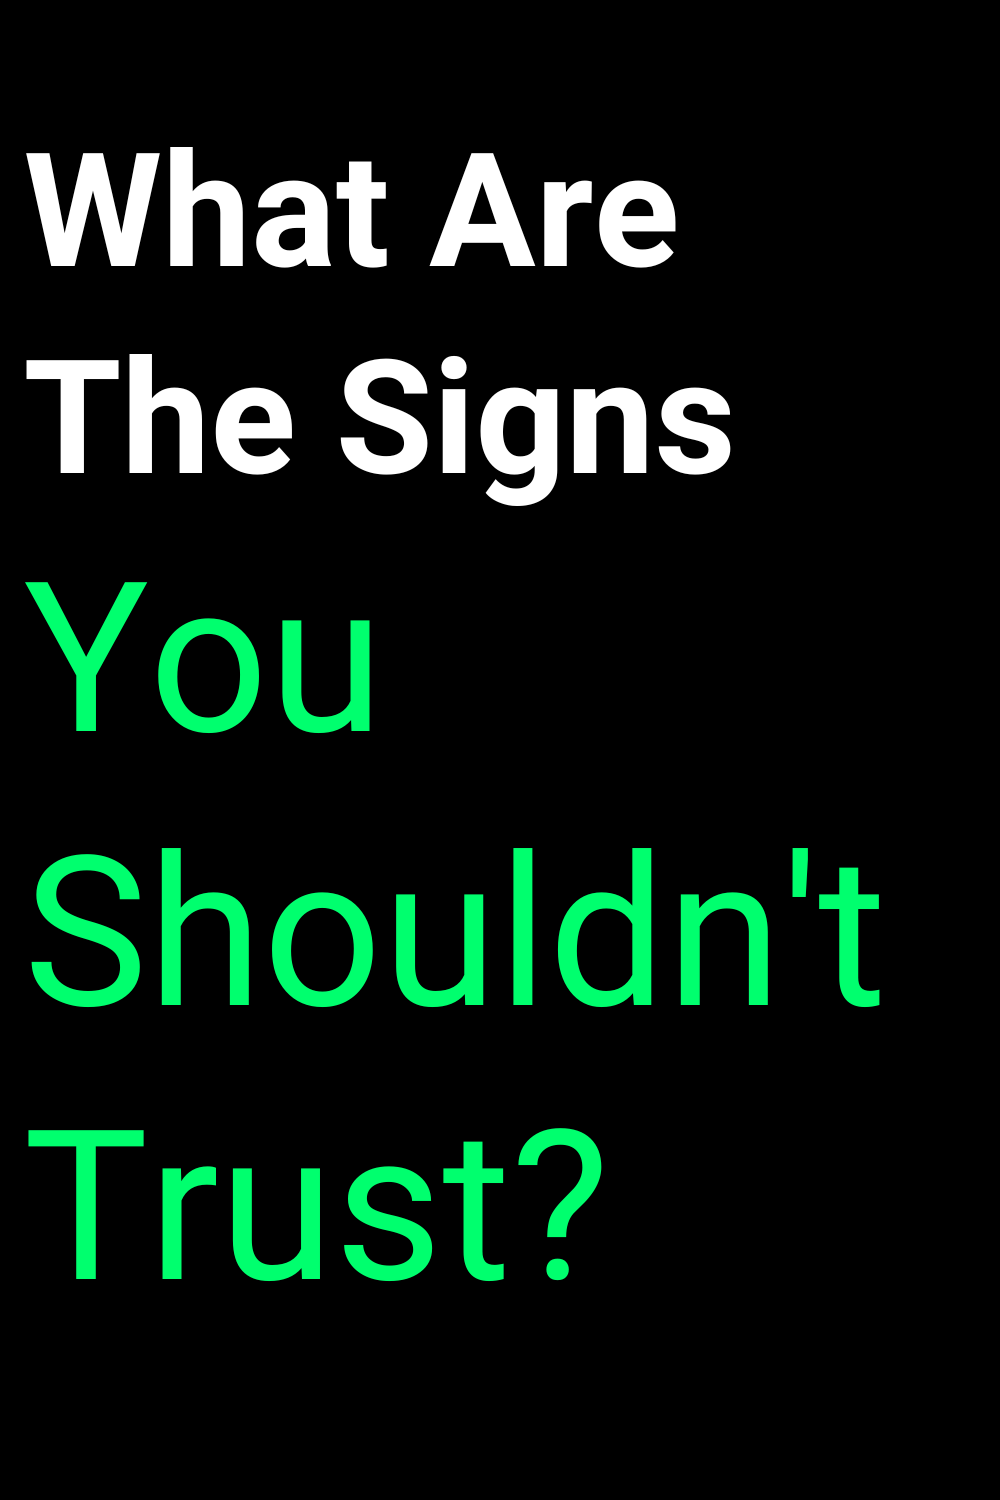 What Are The Signs You Shouldn't Trust?